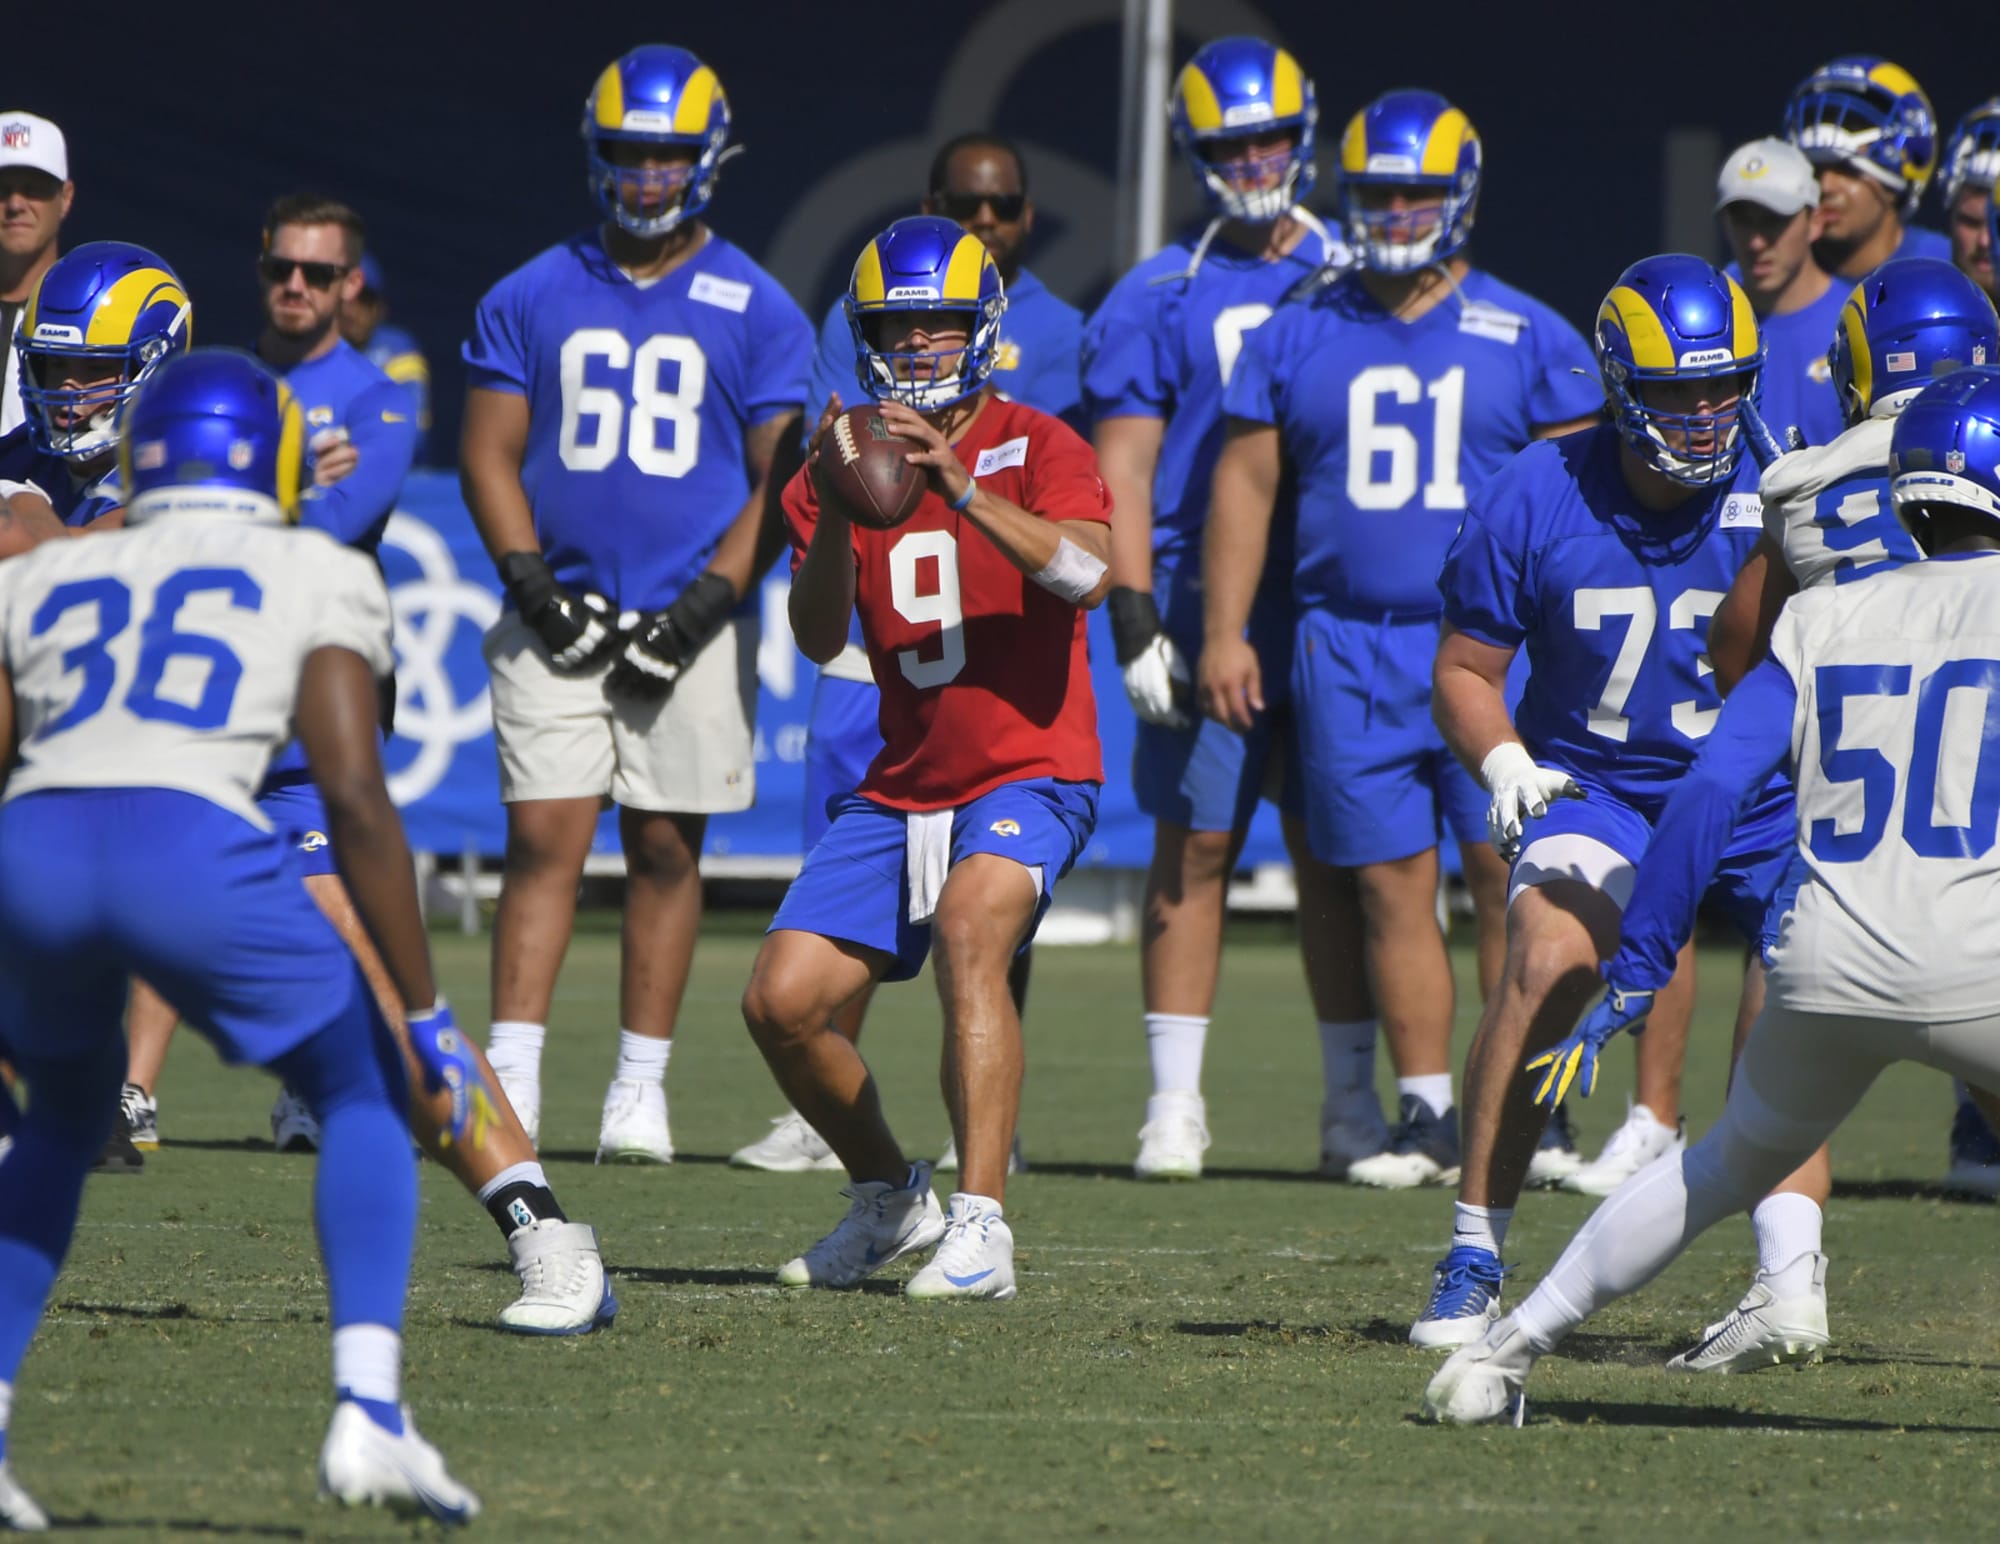 The LA Rams training camp kicks off in less than one month